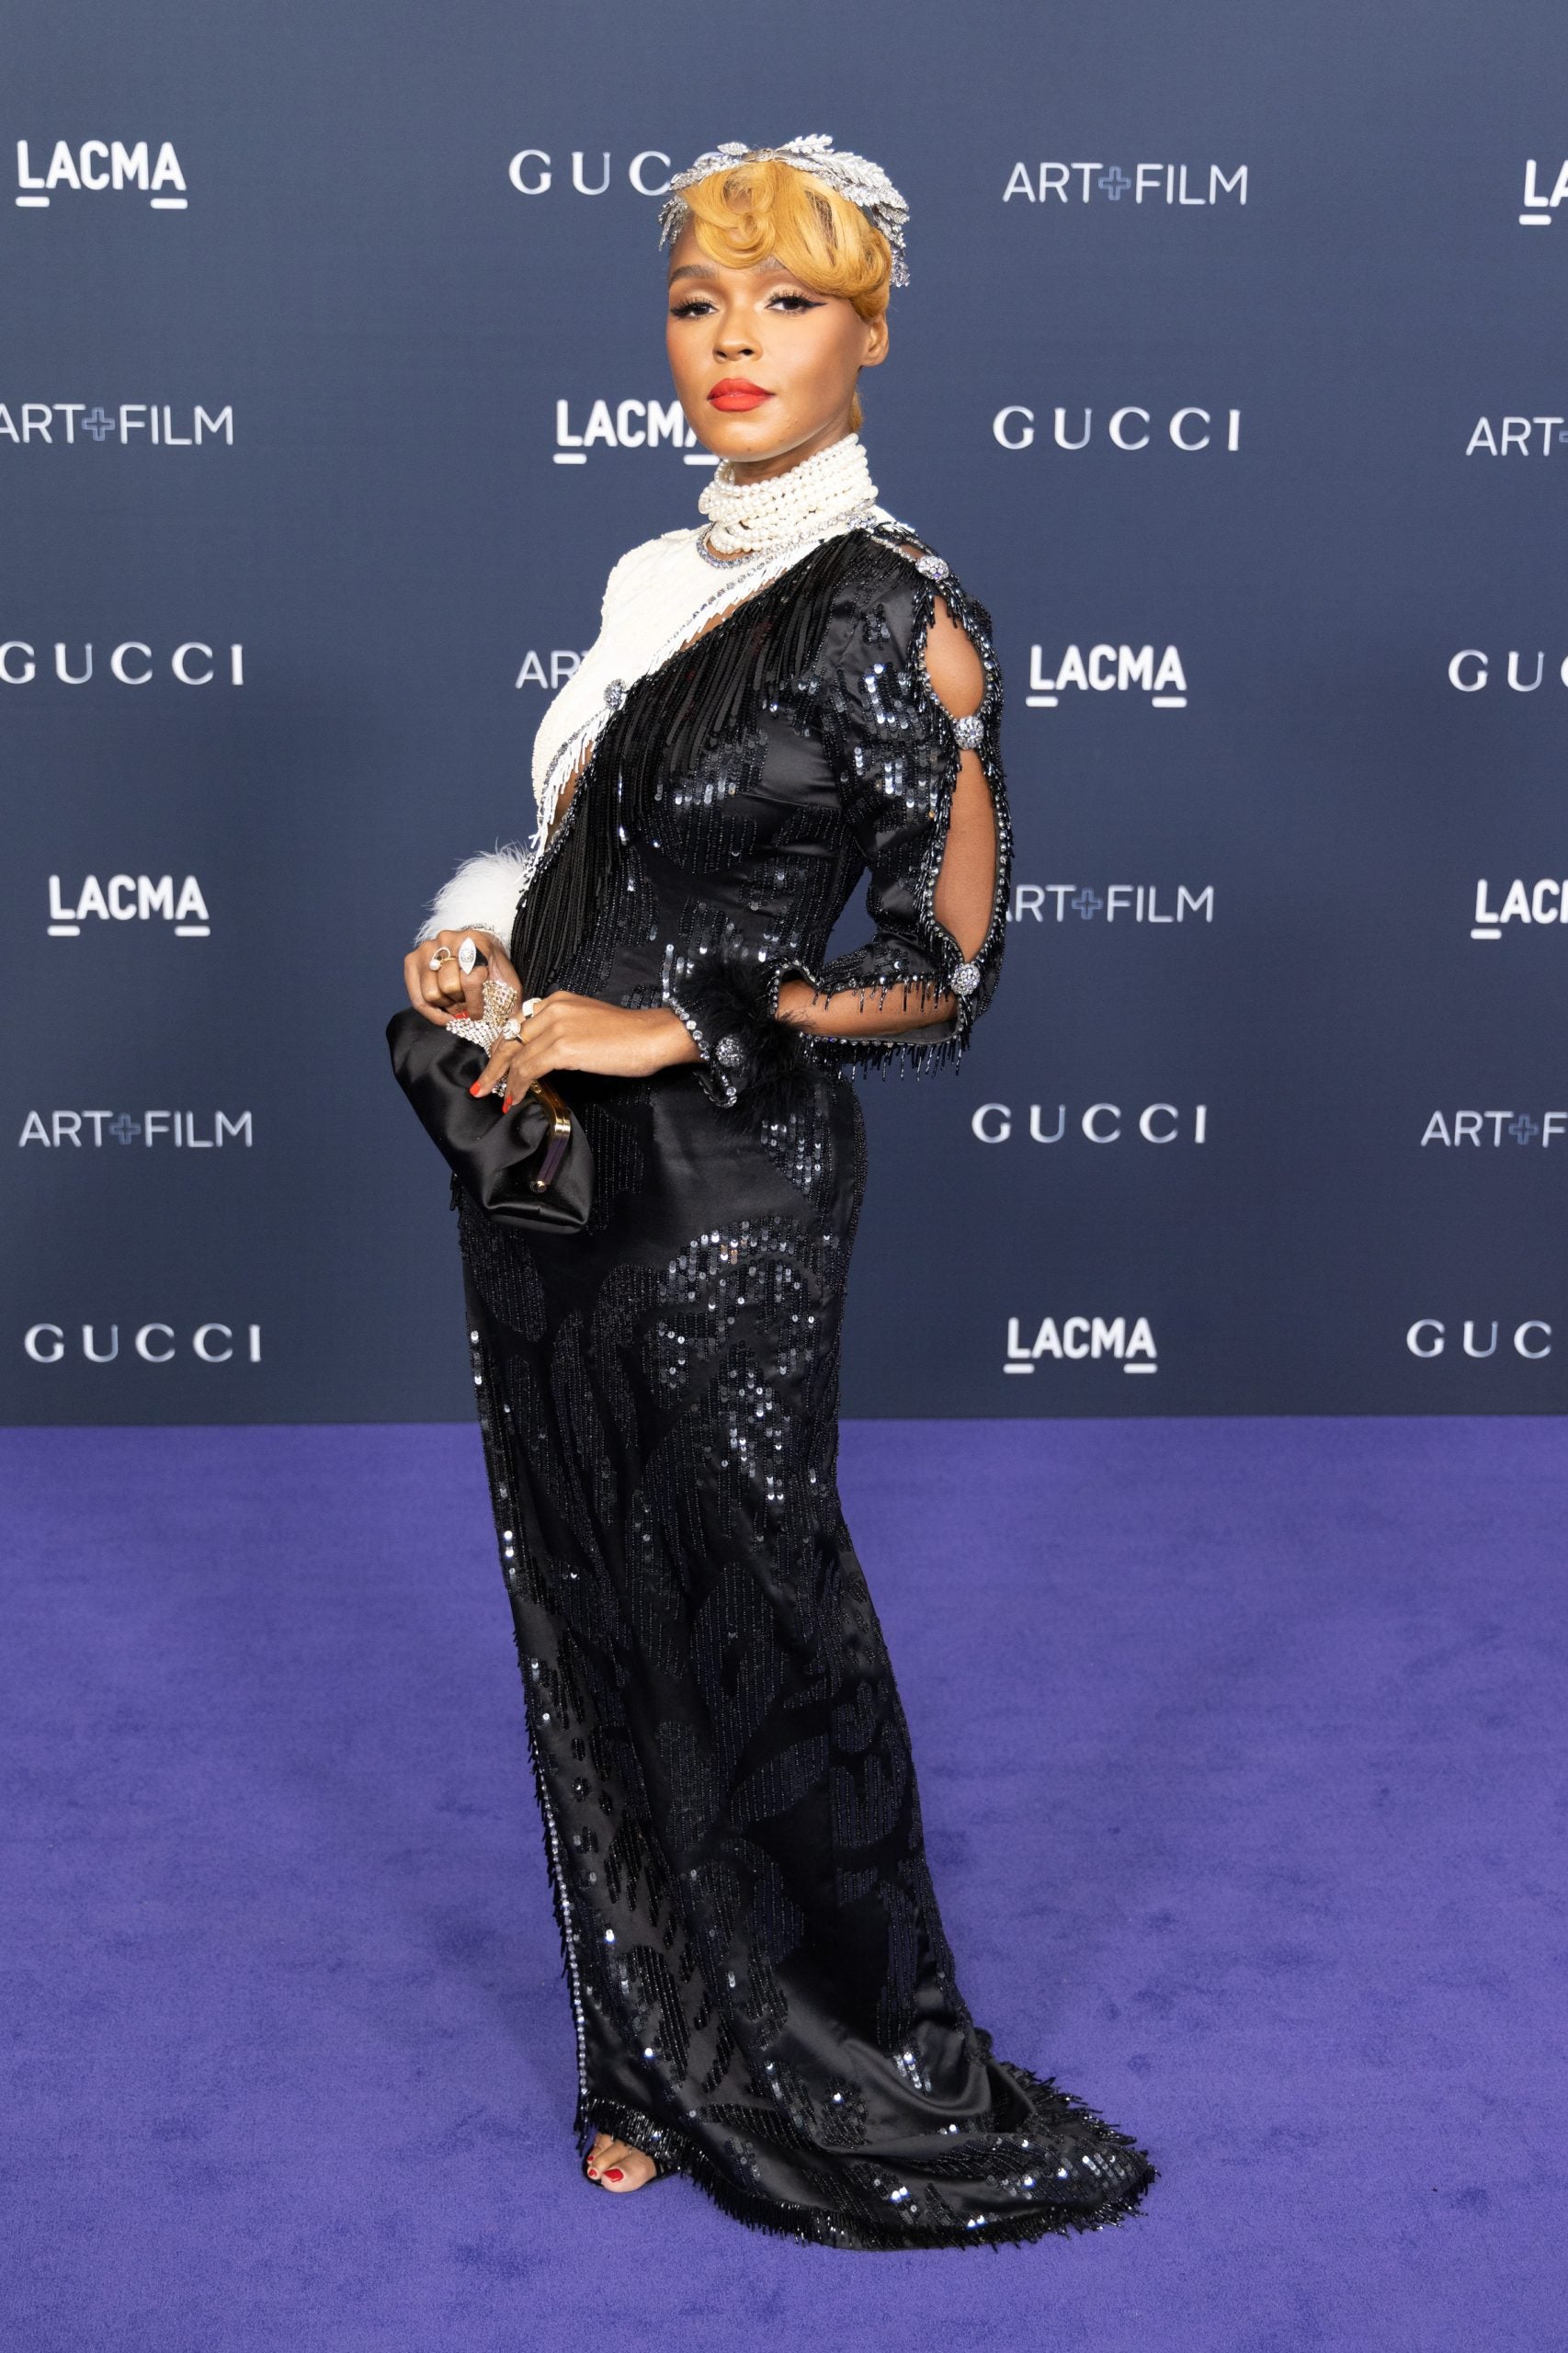 All The Looks From The 2022 LACMA Art+Film Gala